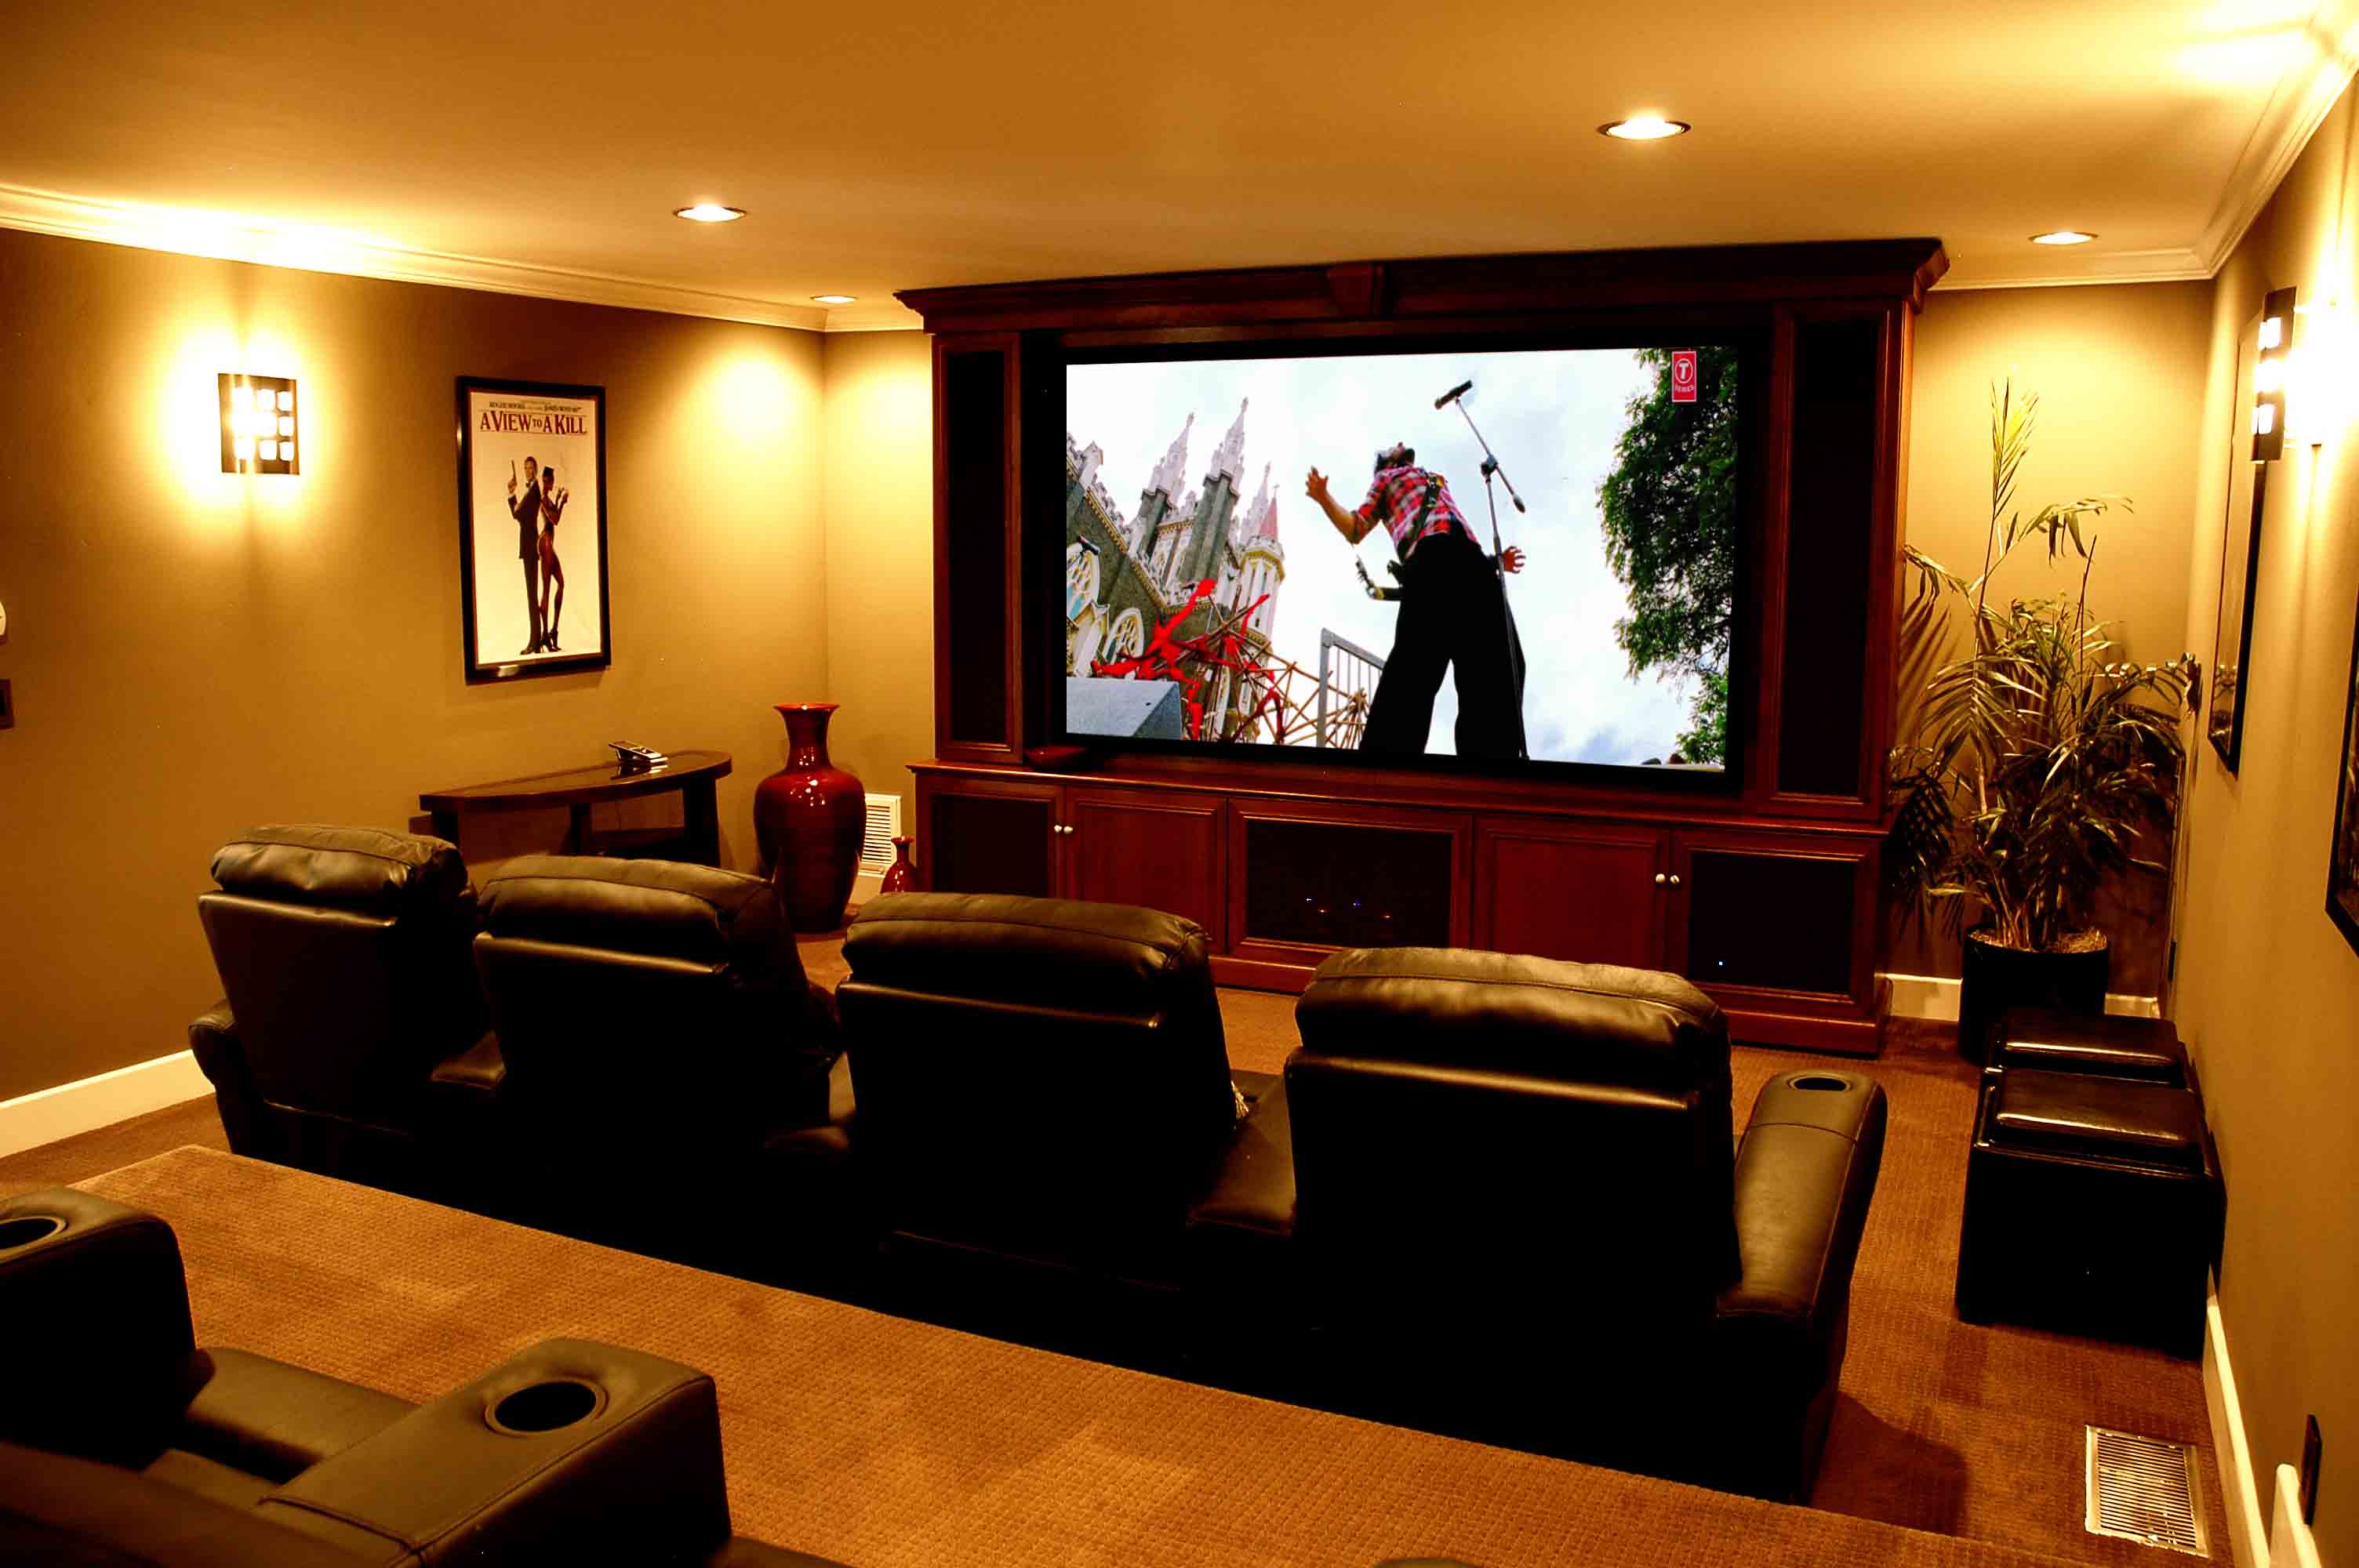 Movie Room Furniture: Cuddle Up And Enjoy The Show